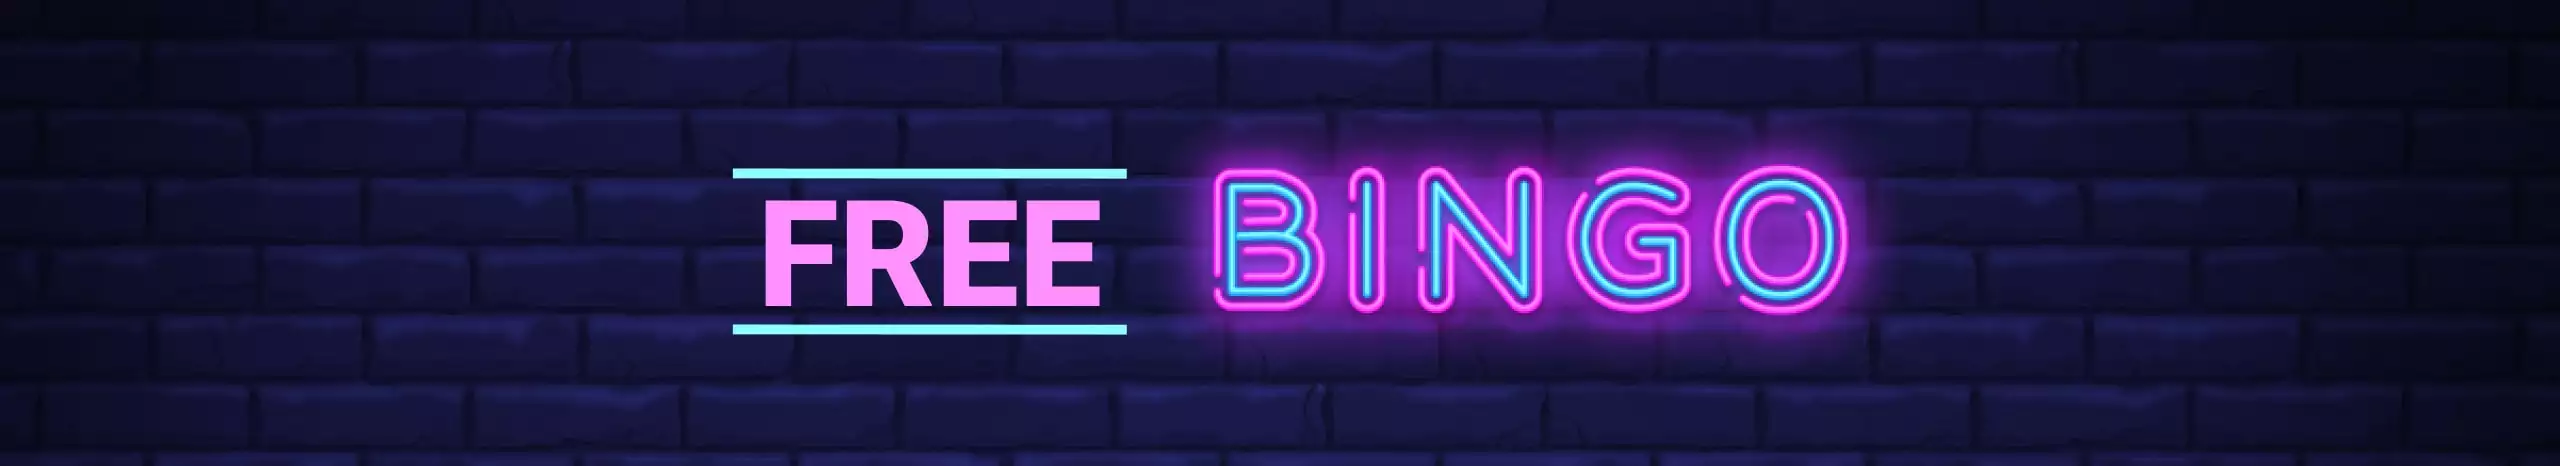 Check out Bingo Barmy Promotions that list all of our offers and monthly specials including terms and conditions here!